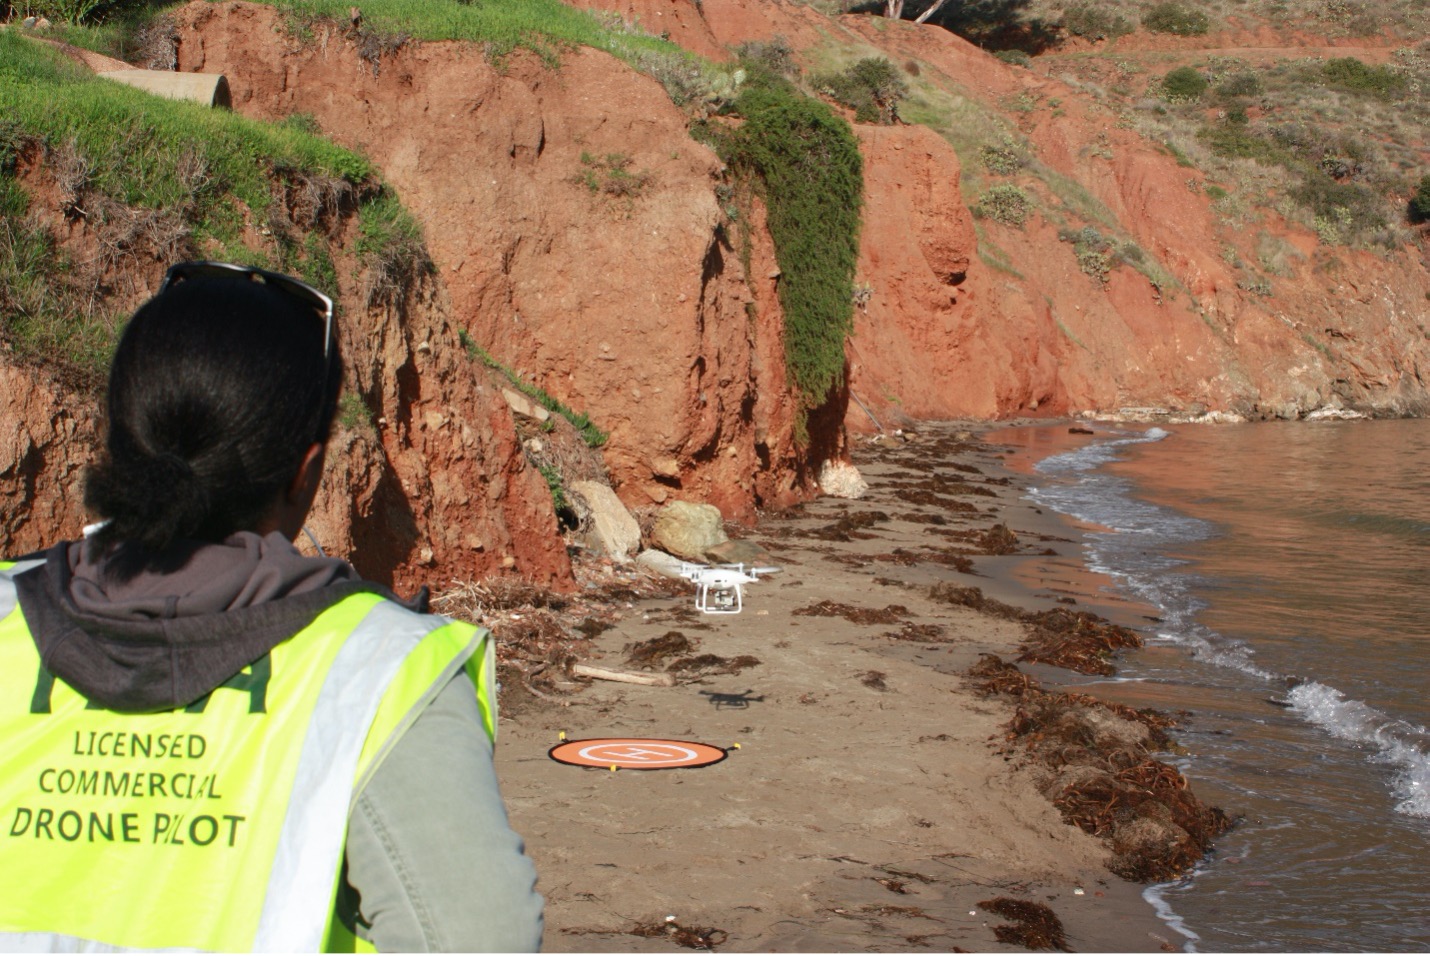 Wrigley Graduate Fellow Charnelle Wickliff lands a drone on a stretch of sand near the water